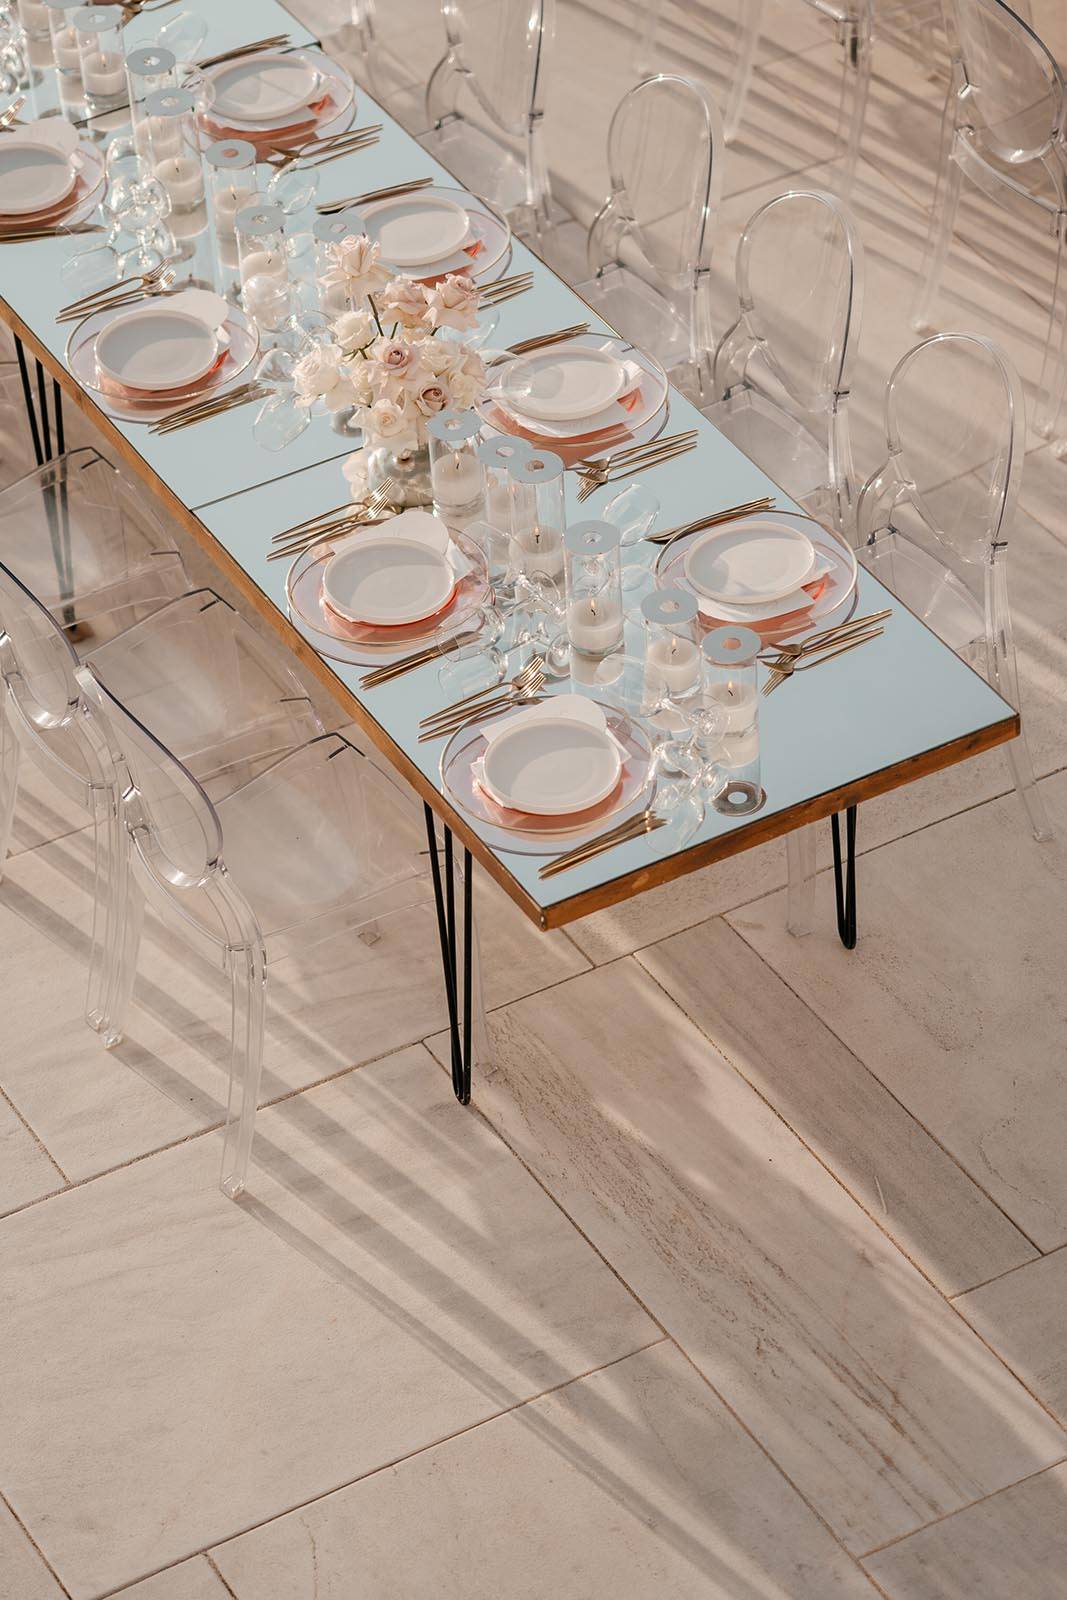 Table layout with mirrored aesthetic